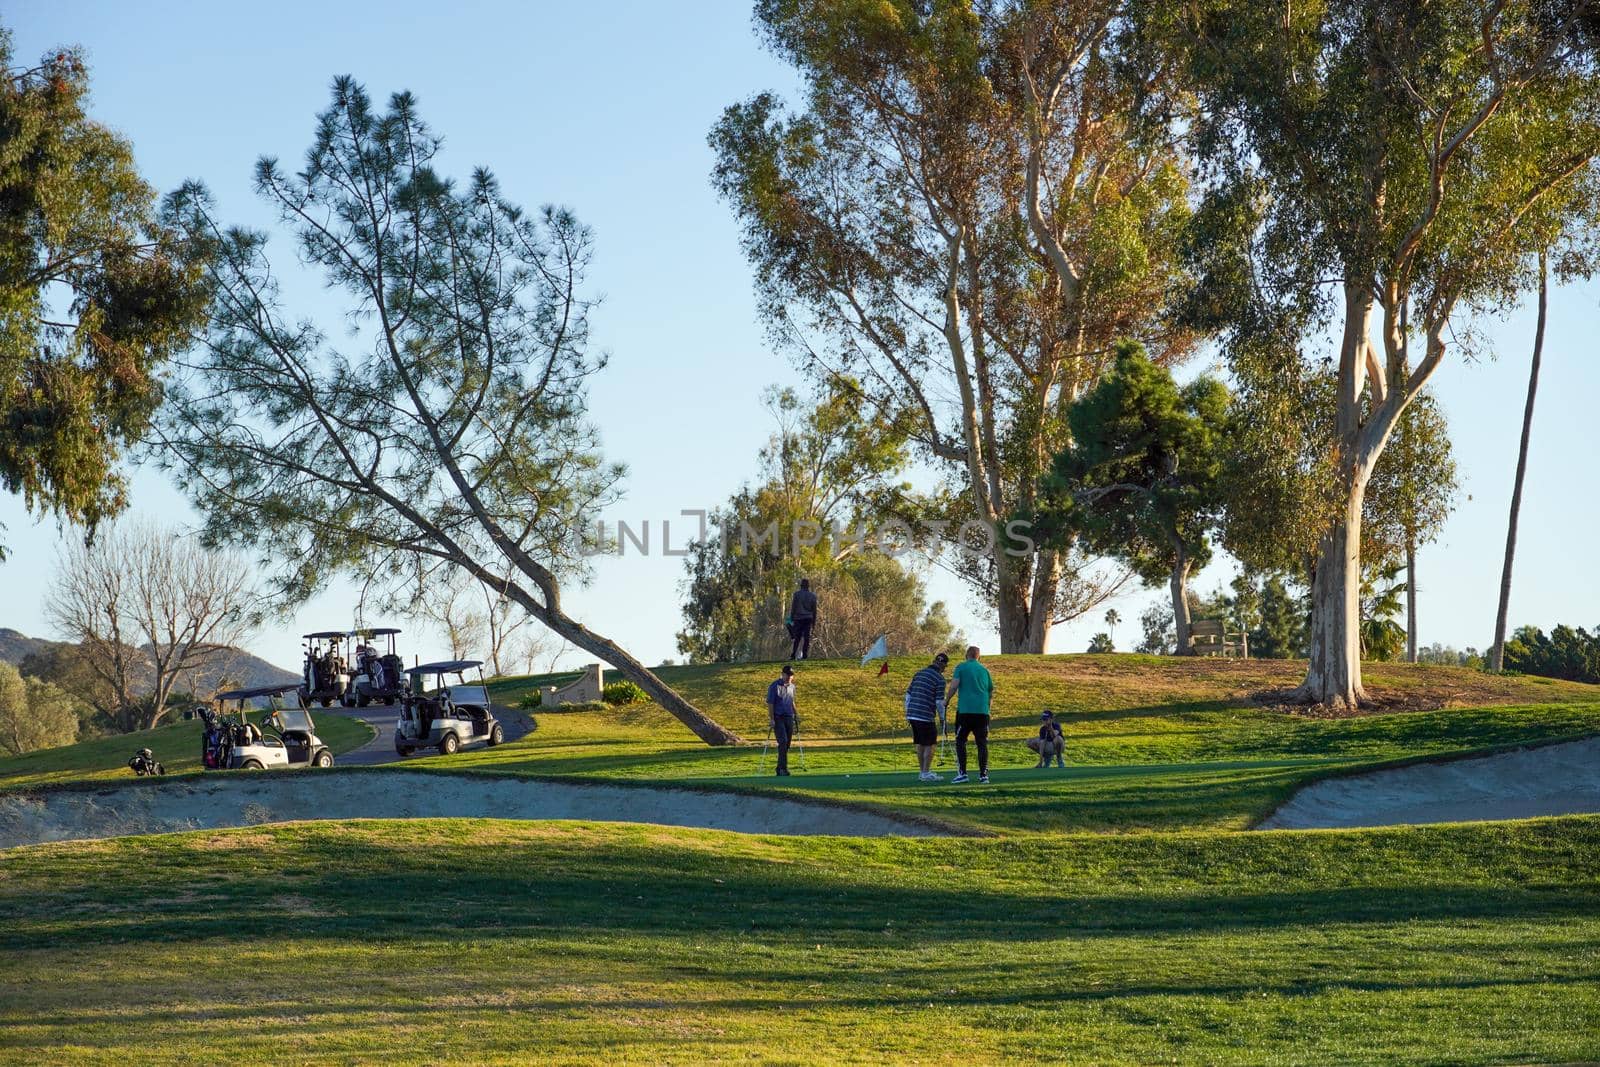 Golfer on the golf course. Golf course with a rich green turf beautiful scenery. San Diego, California, USA. January 2nd, 2020